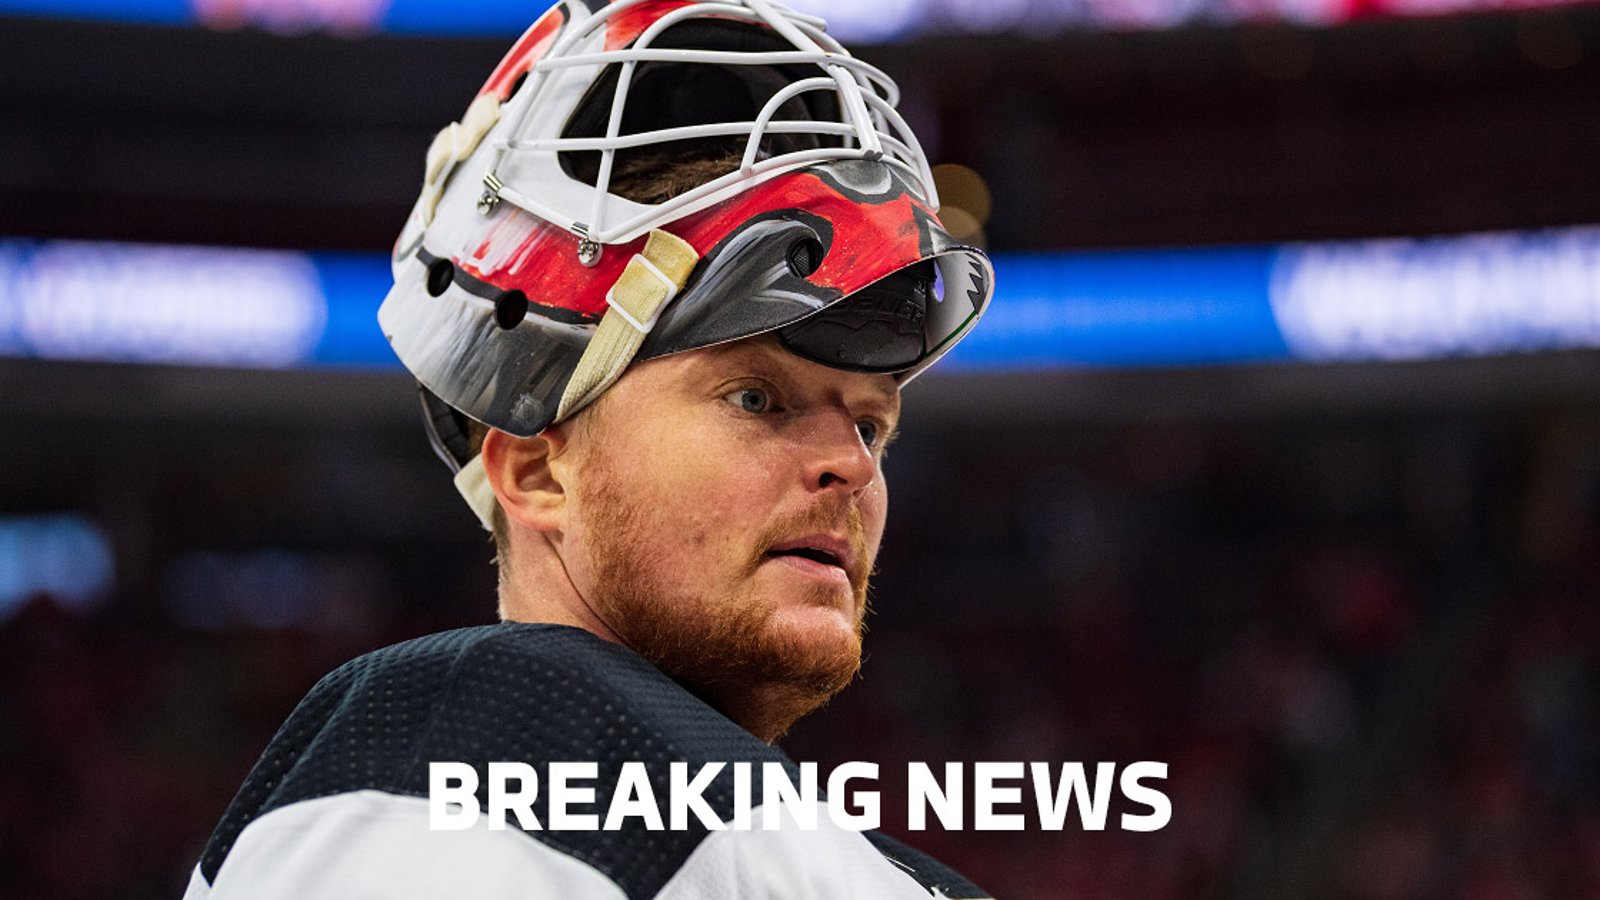 Former All-Star Cory Schneider has been placed on waivers.